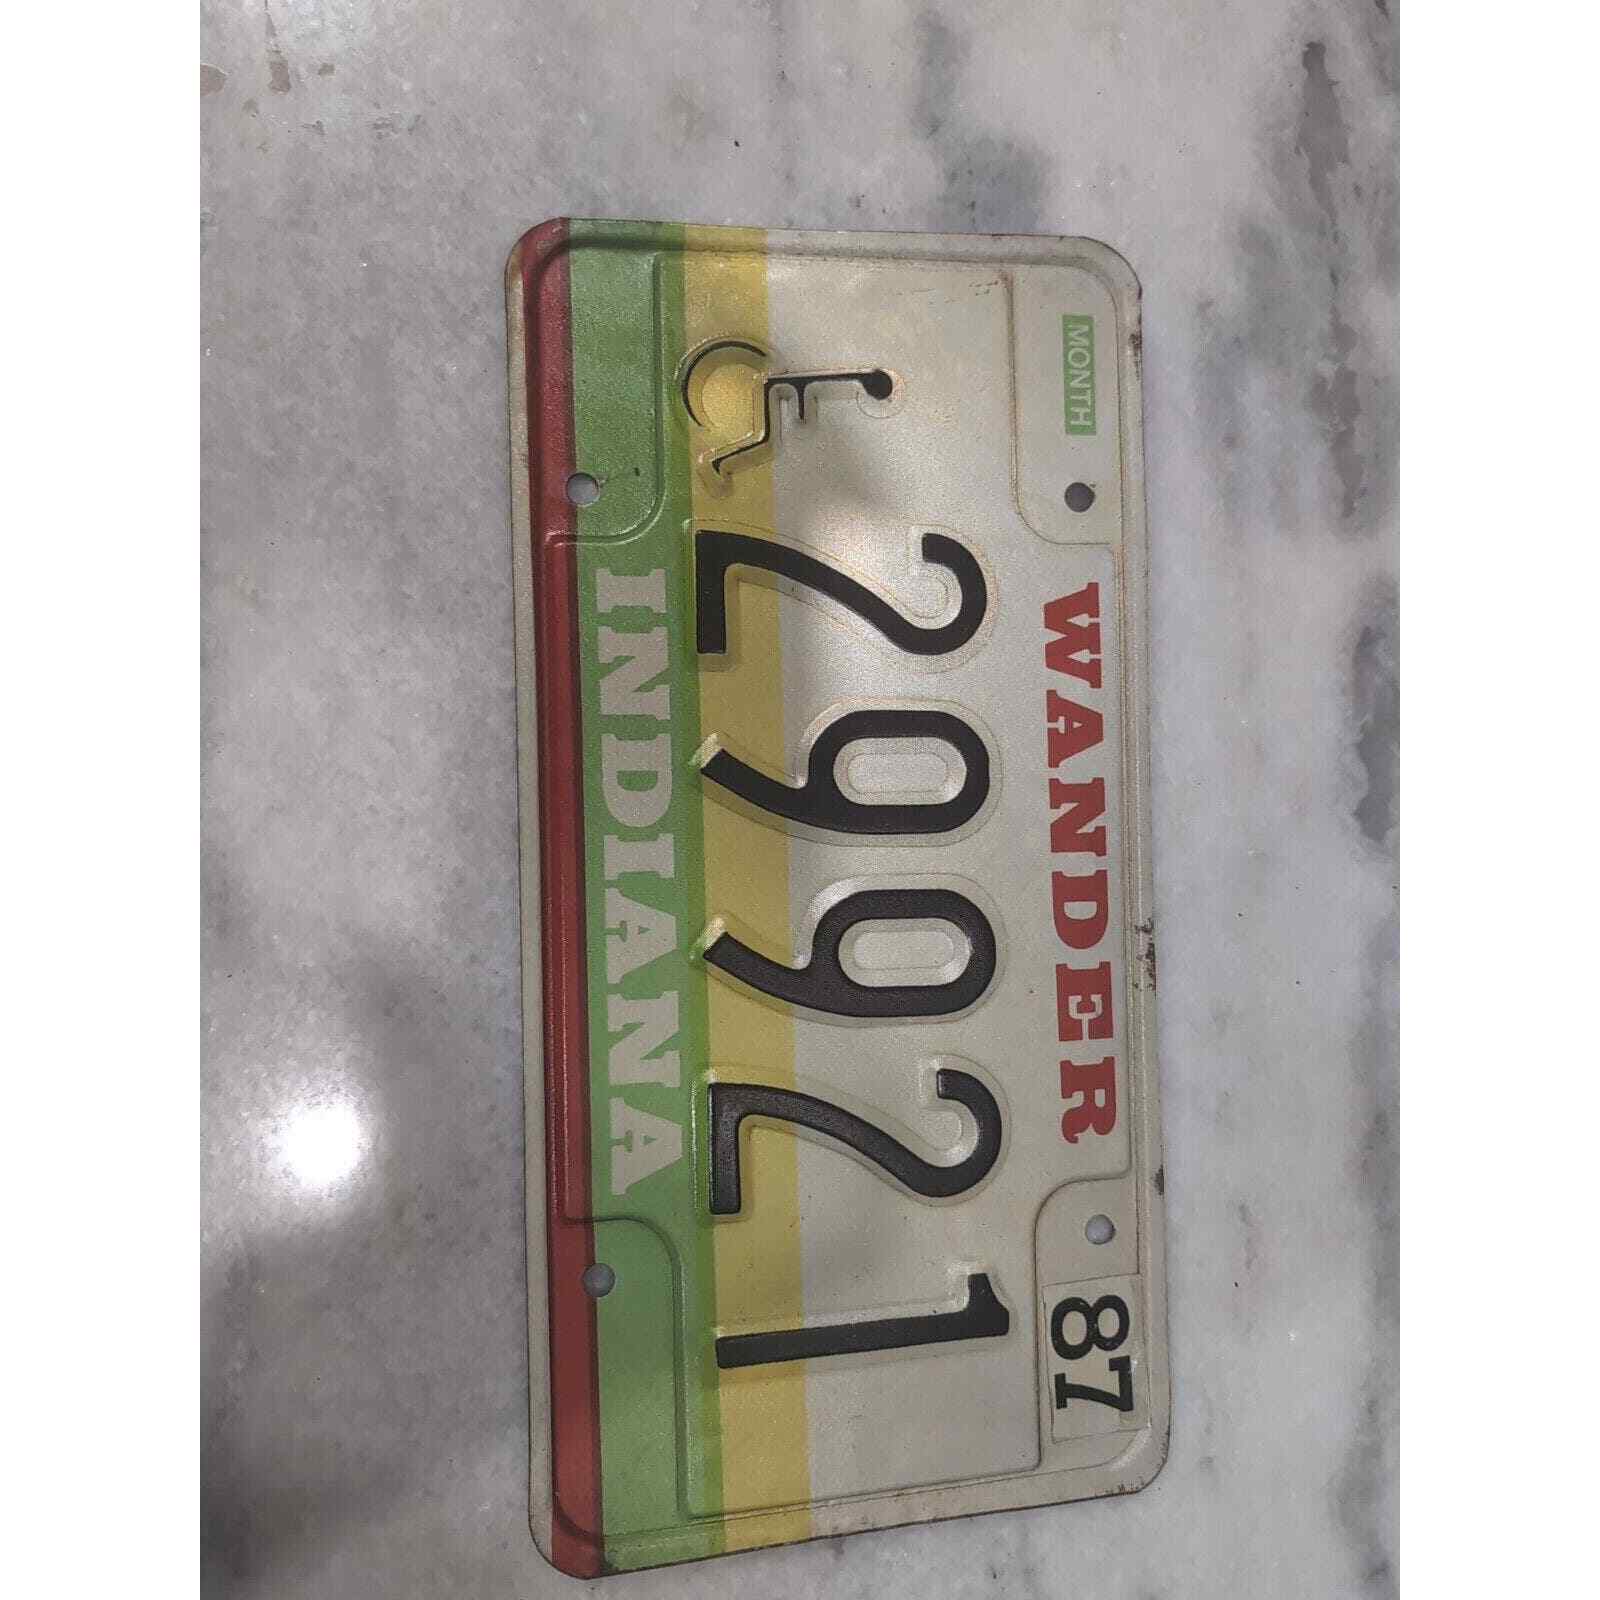 Vintage 1987 Indiana Wander Striped Handicapped License Plate 29921 Expired